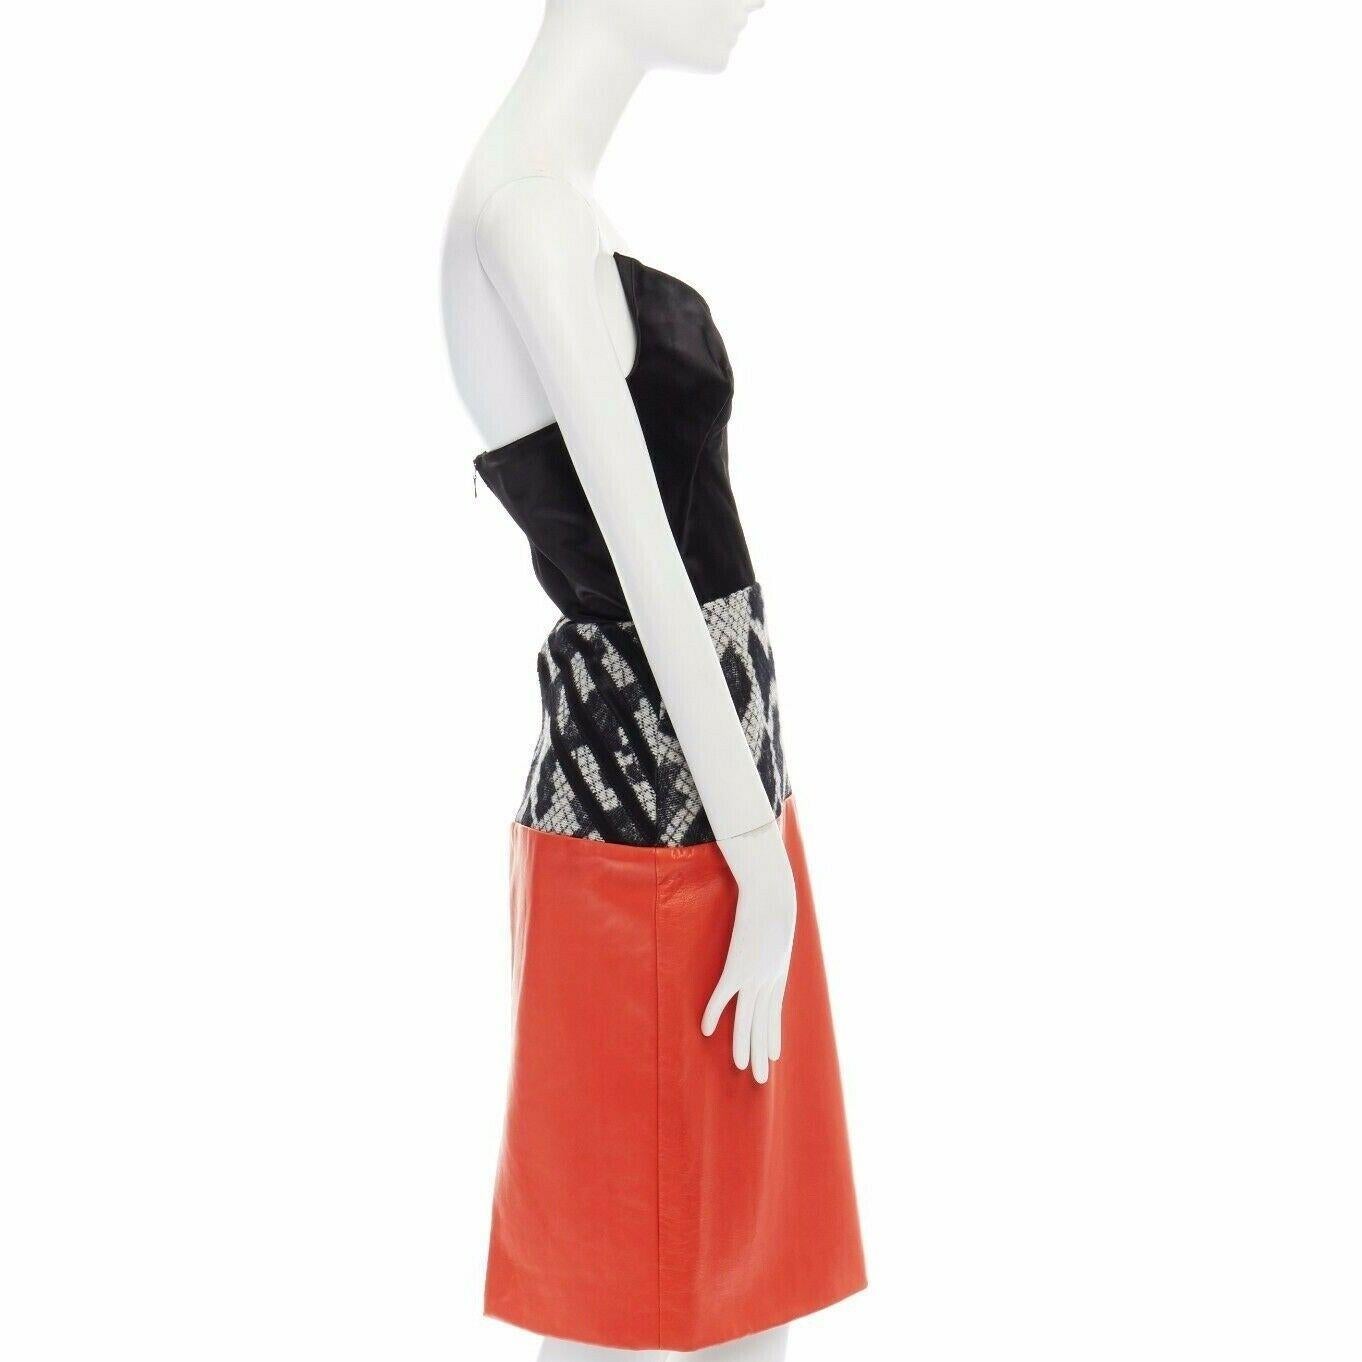 Women's runway BALENCIAGA GHESQUIERE AW12 black satin bustier red leather dress UK8 US4